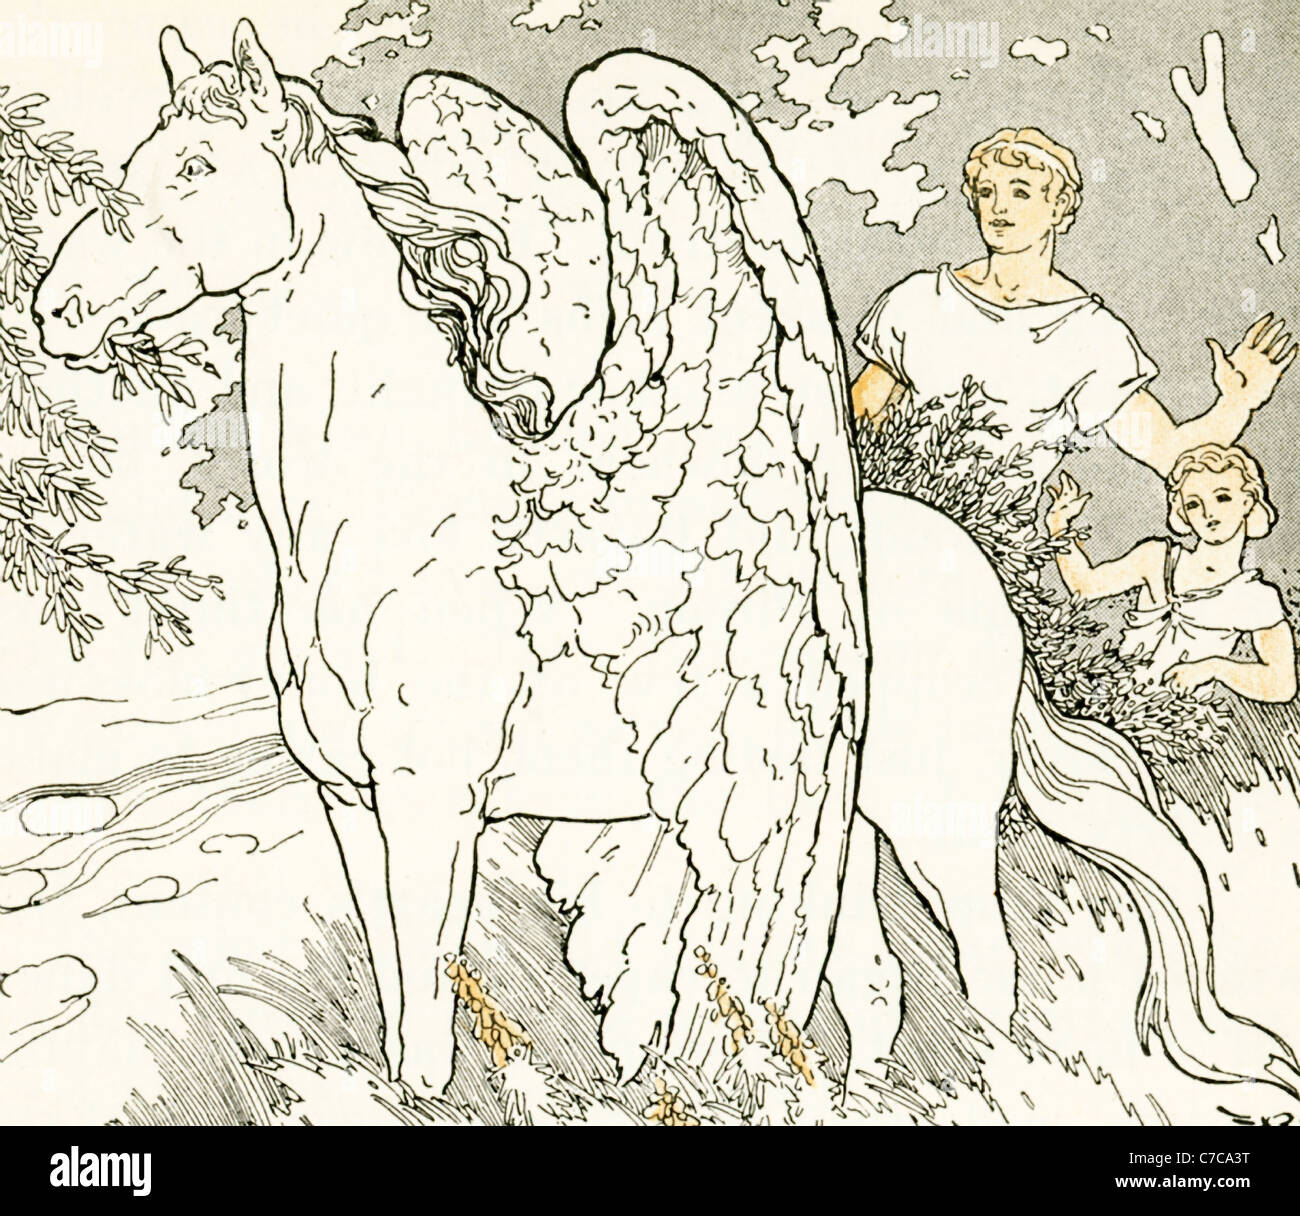 Bellerophon approaches the winged horse Pegasus, which he mounts with the help of the goddess Athena. Stock Photo